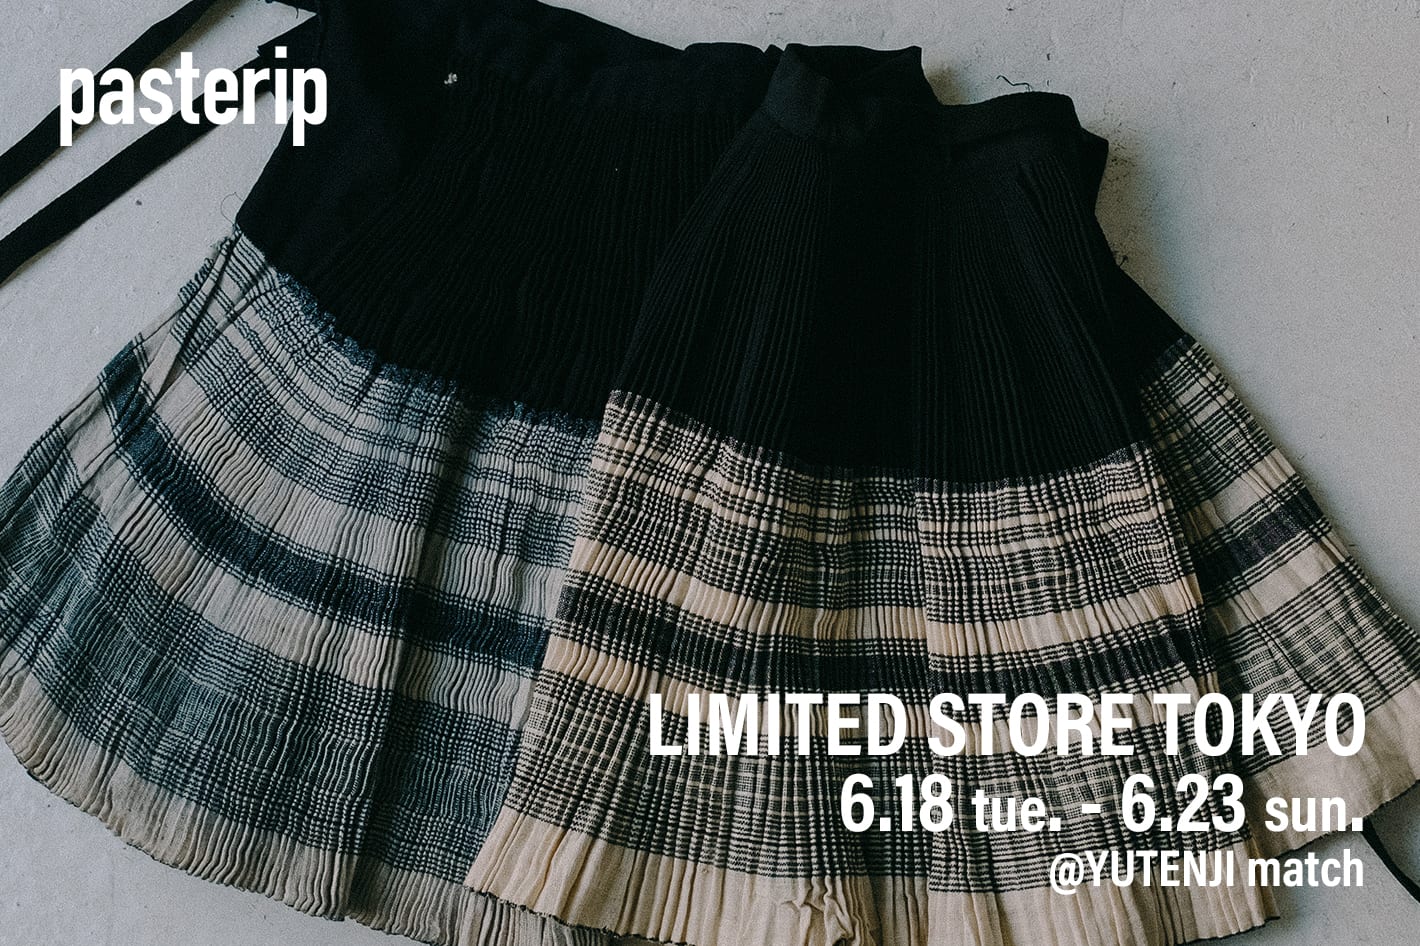 Pasterip LIMITED STORE TOKYO vol.2